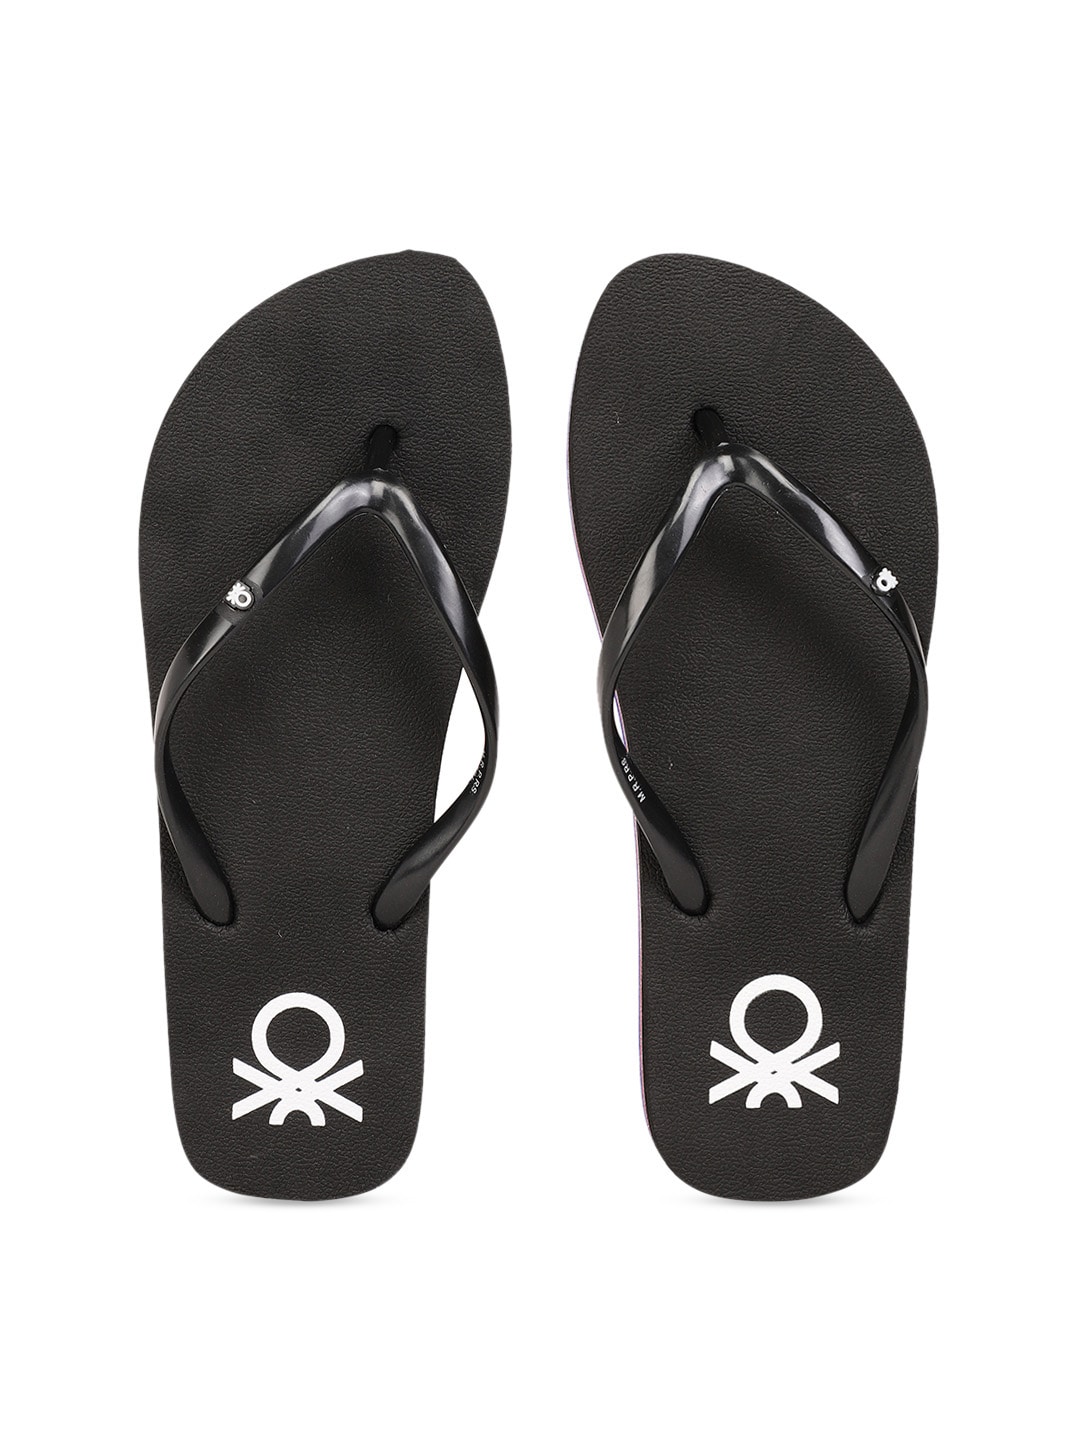 United Colors of Benetton Women Black Solid Thong Flip-Flops Price in India